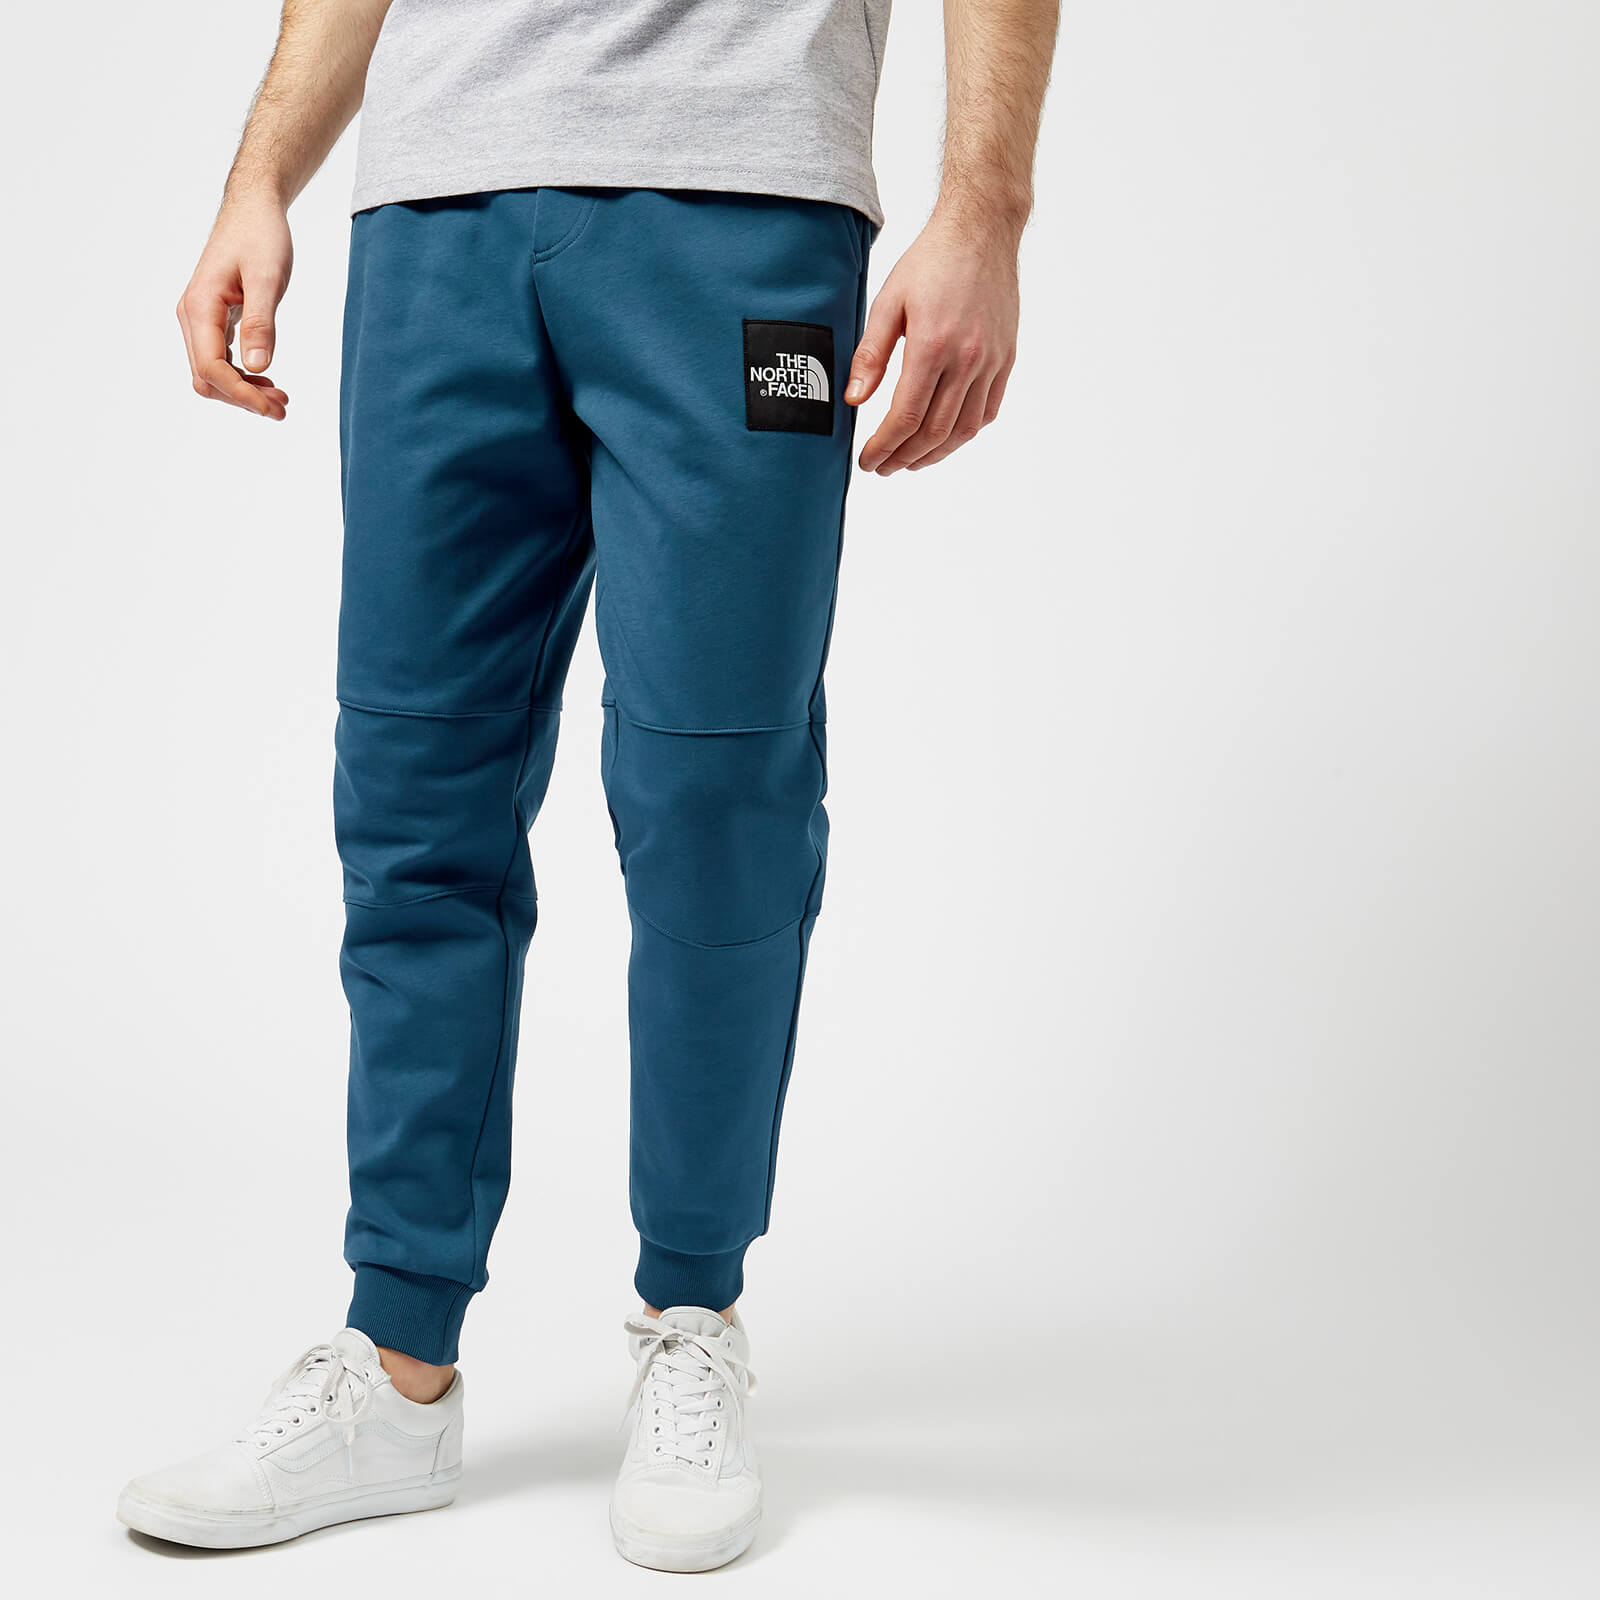 north face fine pant